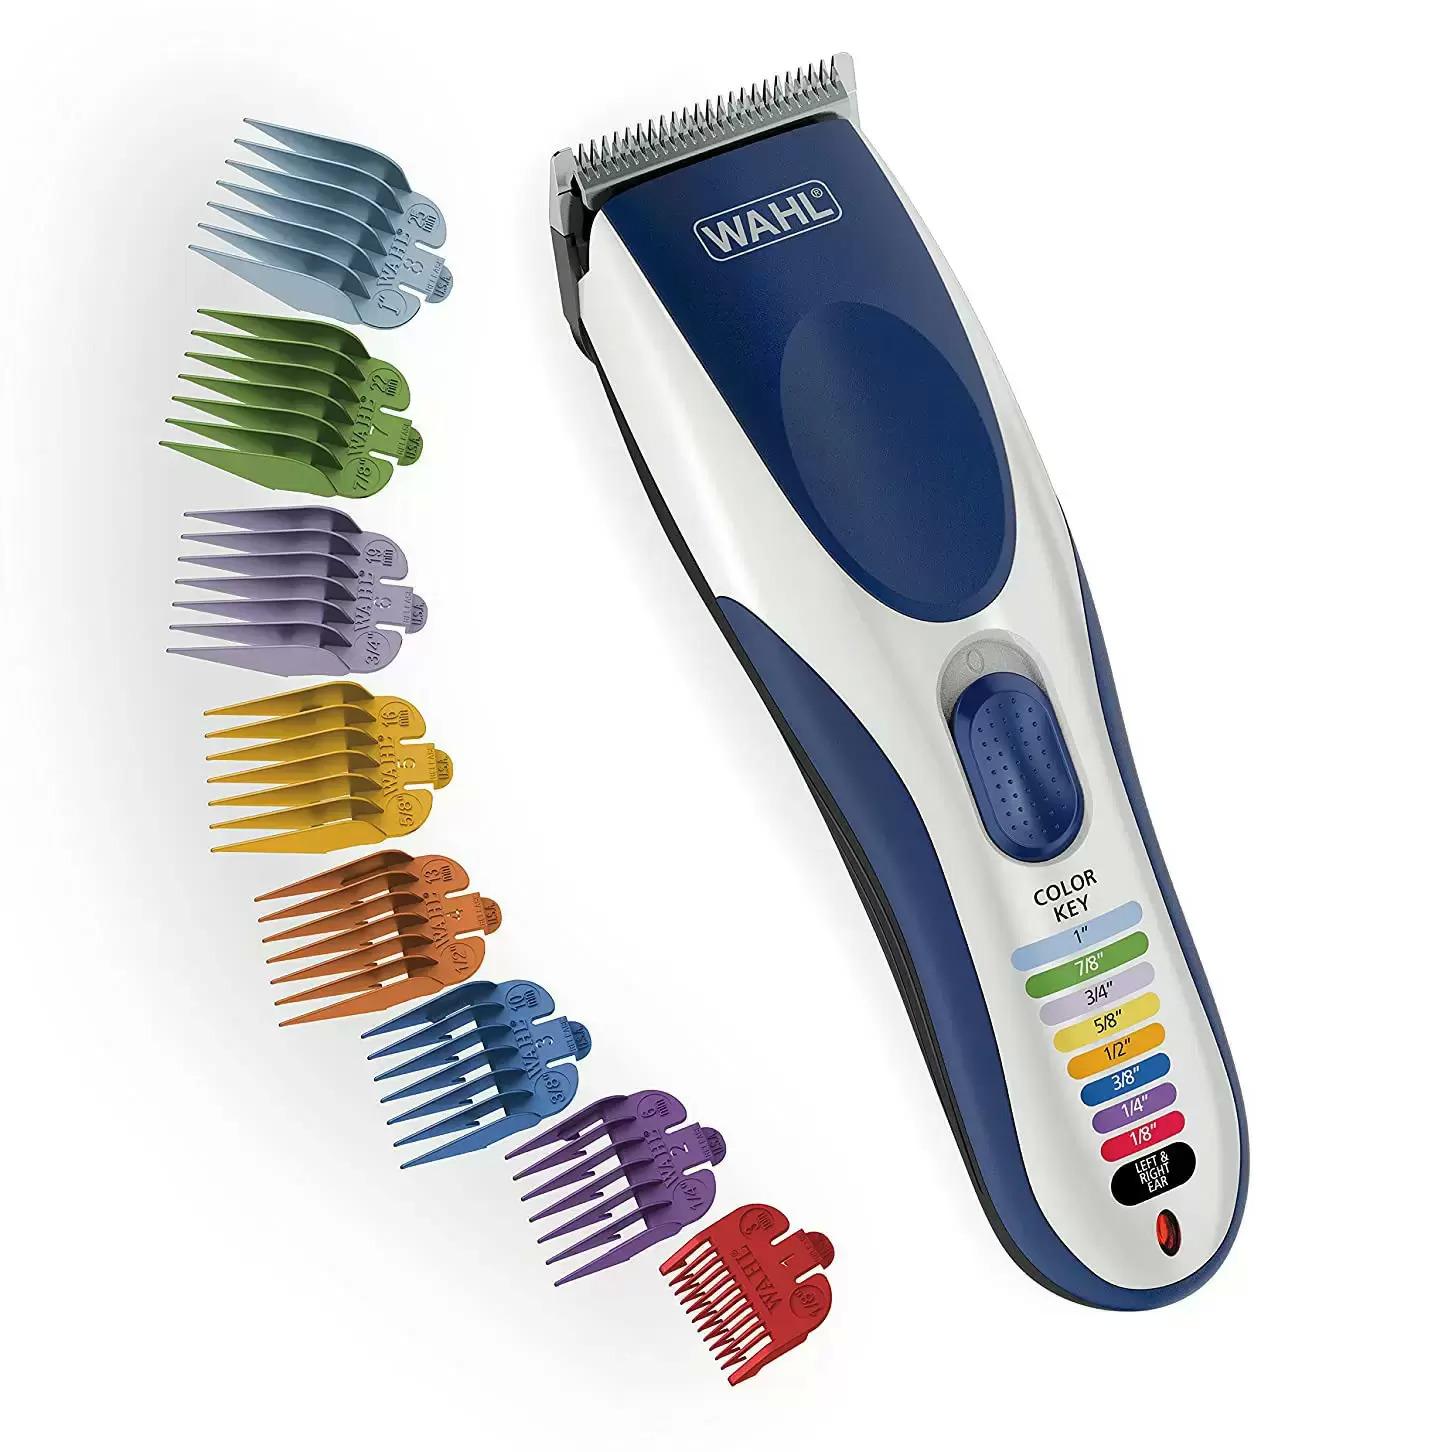 Wahl Color Pro Cordless Rechargeable Hair Clipper and Trimmer for $16.95